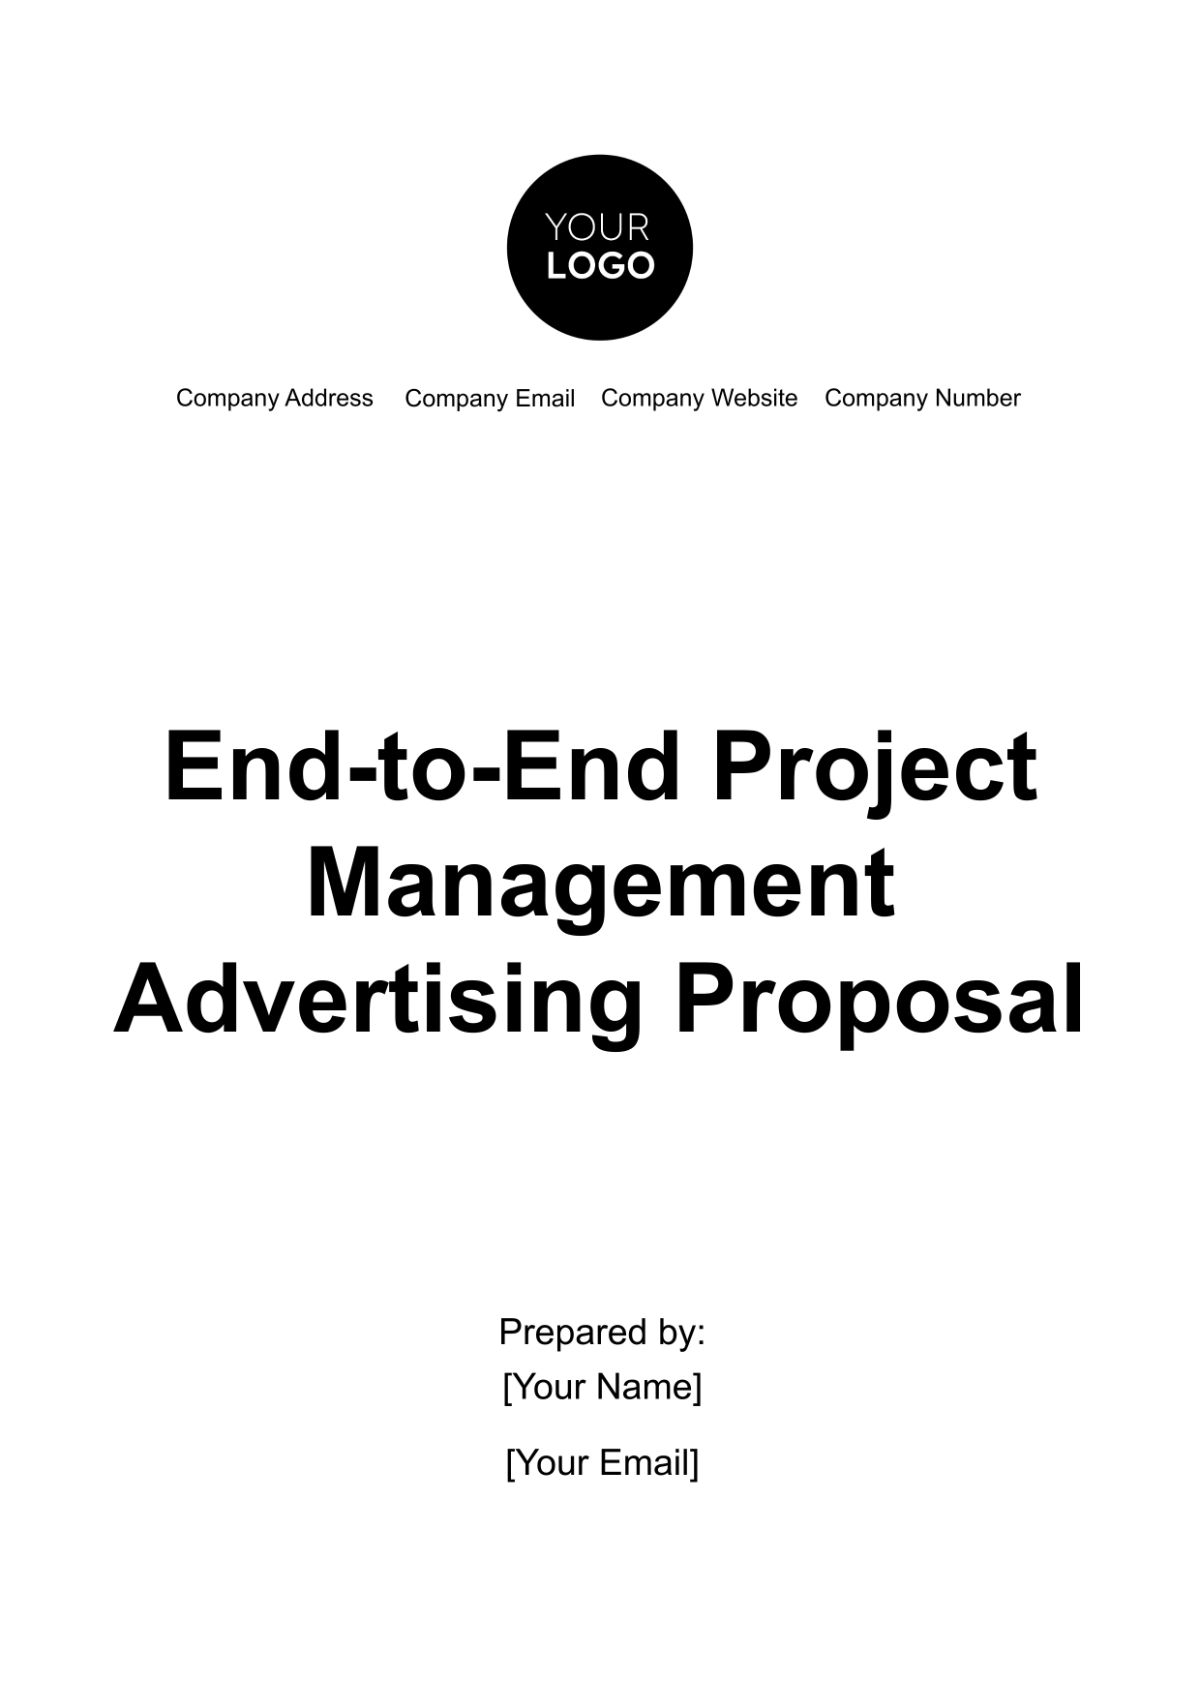 End-to-End Project Management Advertising Proposal Template